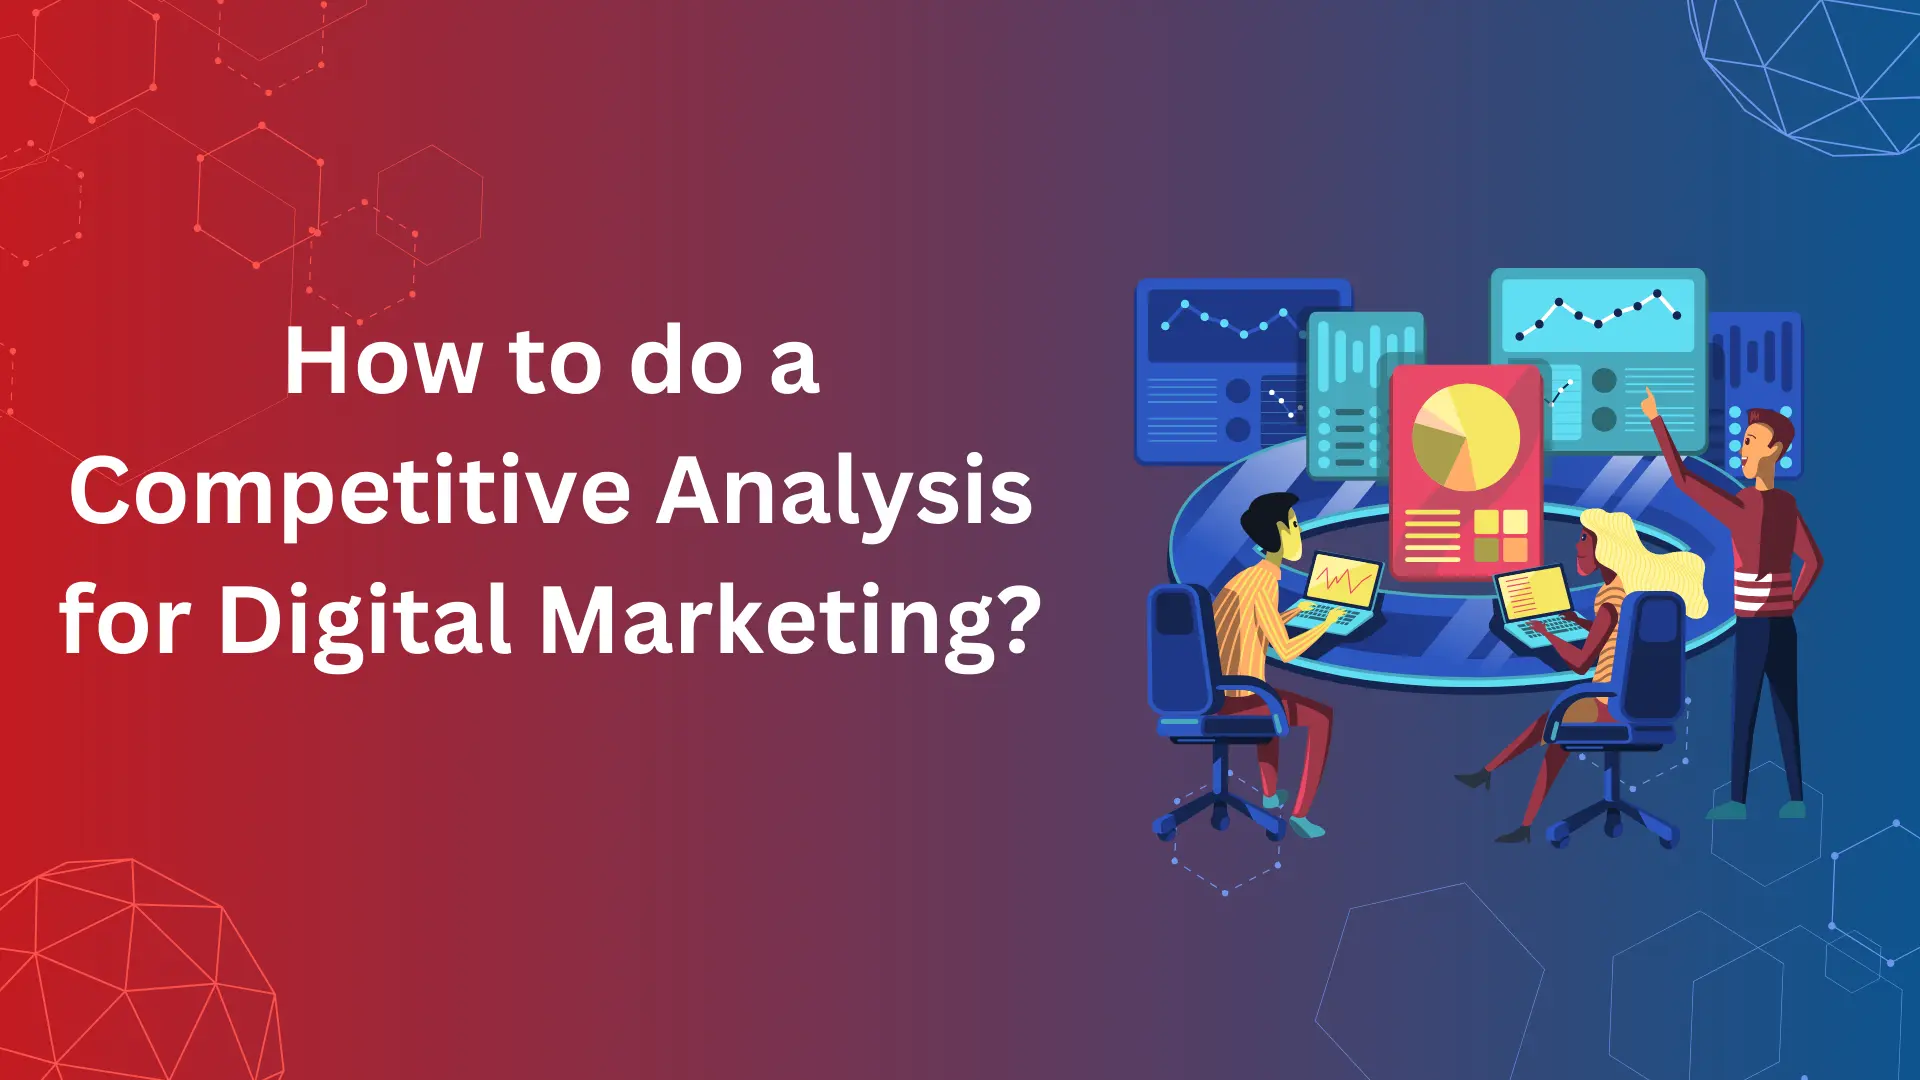 How to do a Competitive Analysis for Digital Marketing